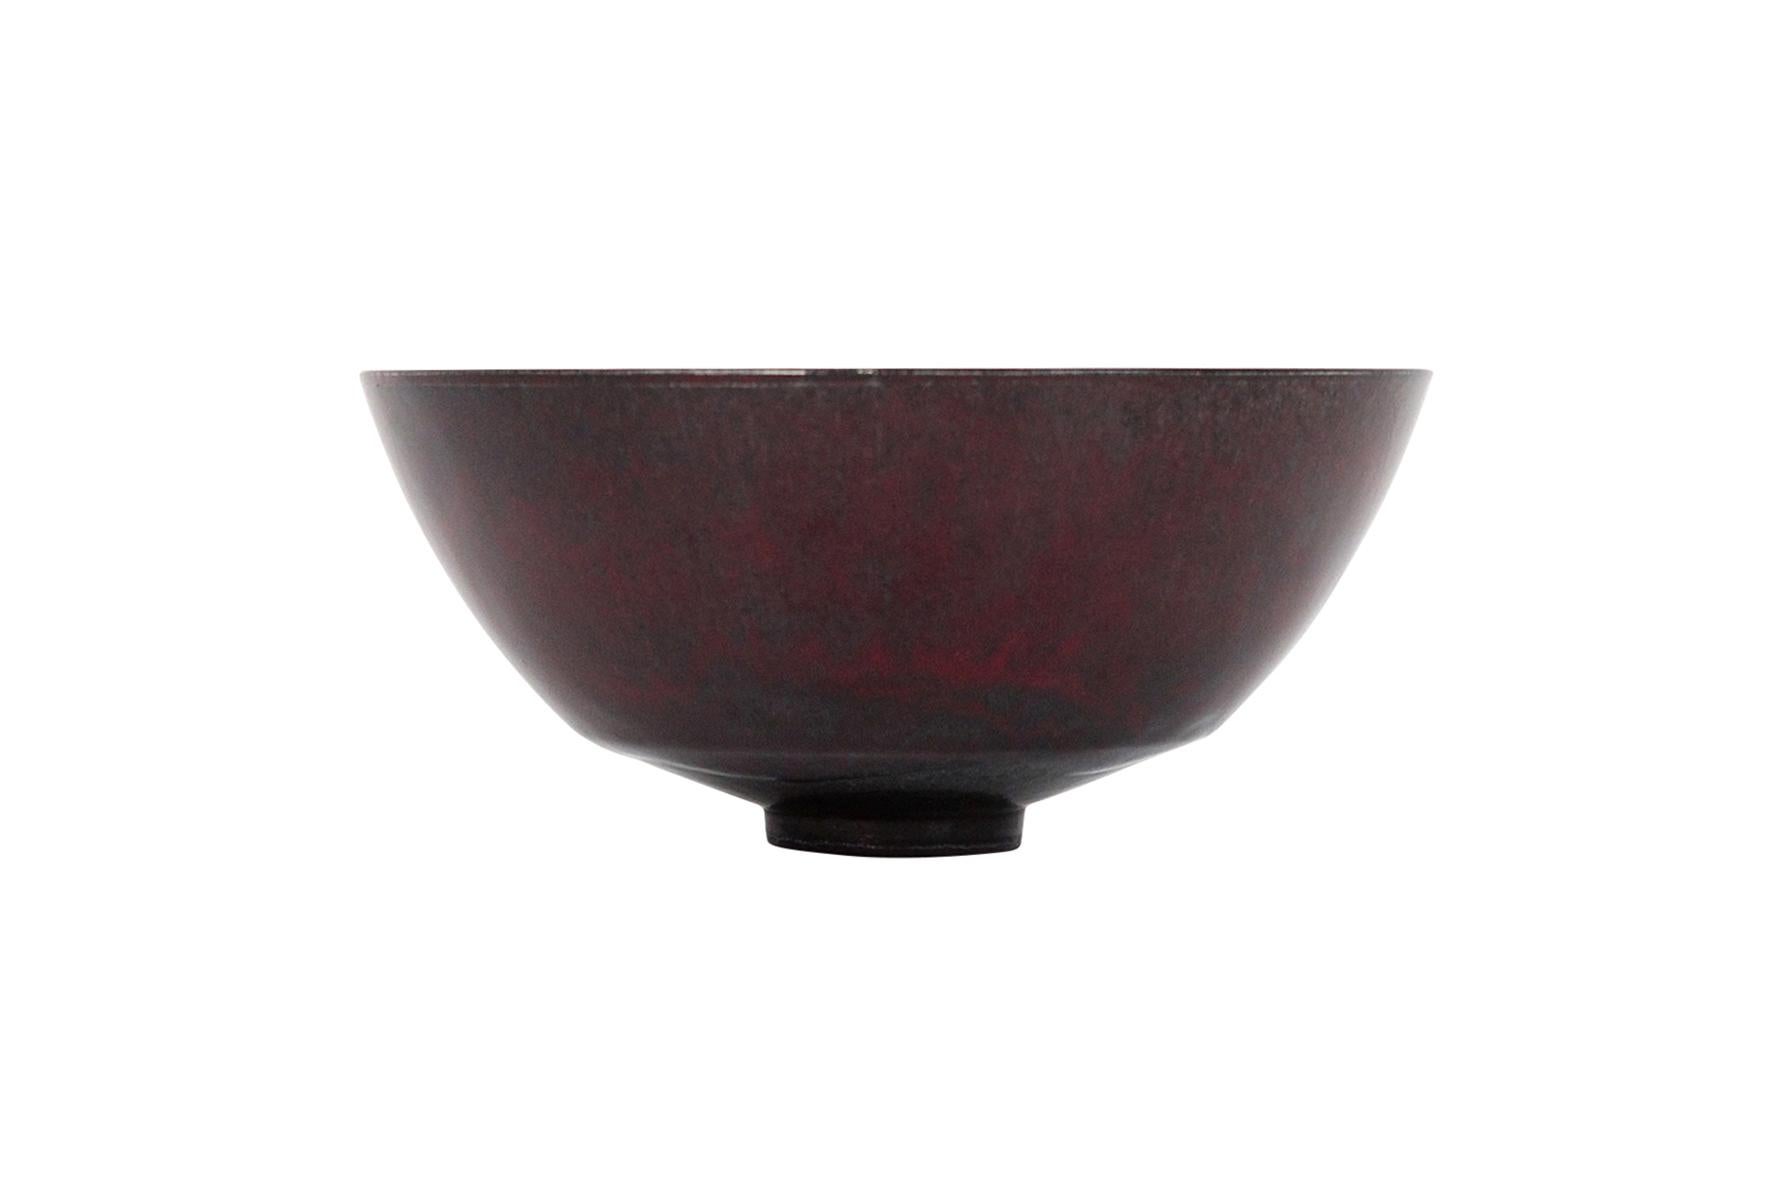 Thin walled studio potter bowl by noted Californian ceramicist James Lovera. Rich ox blood red glazing to this superb example. Signed with 